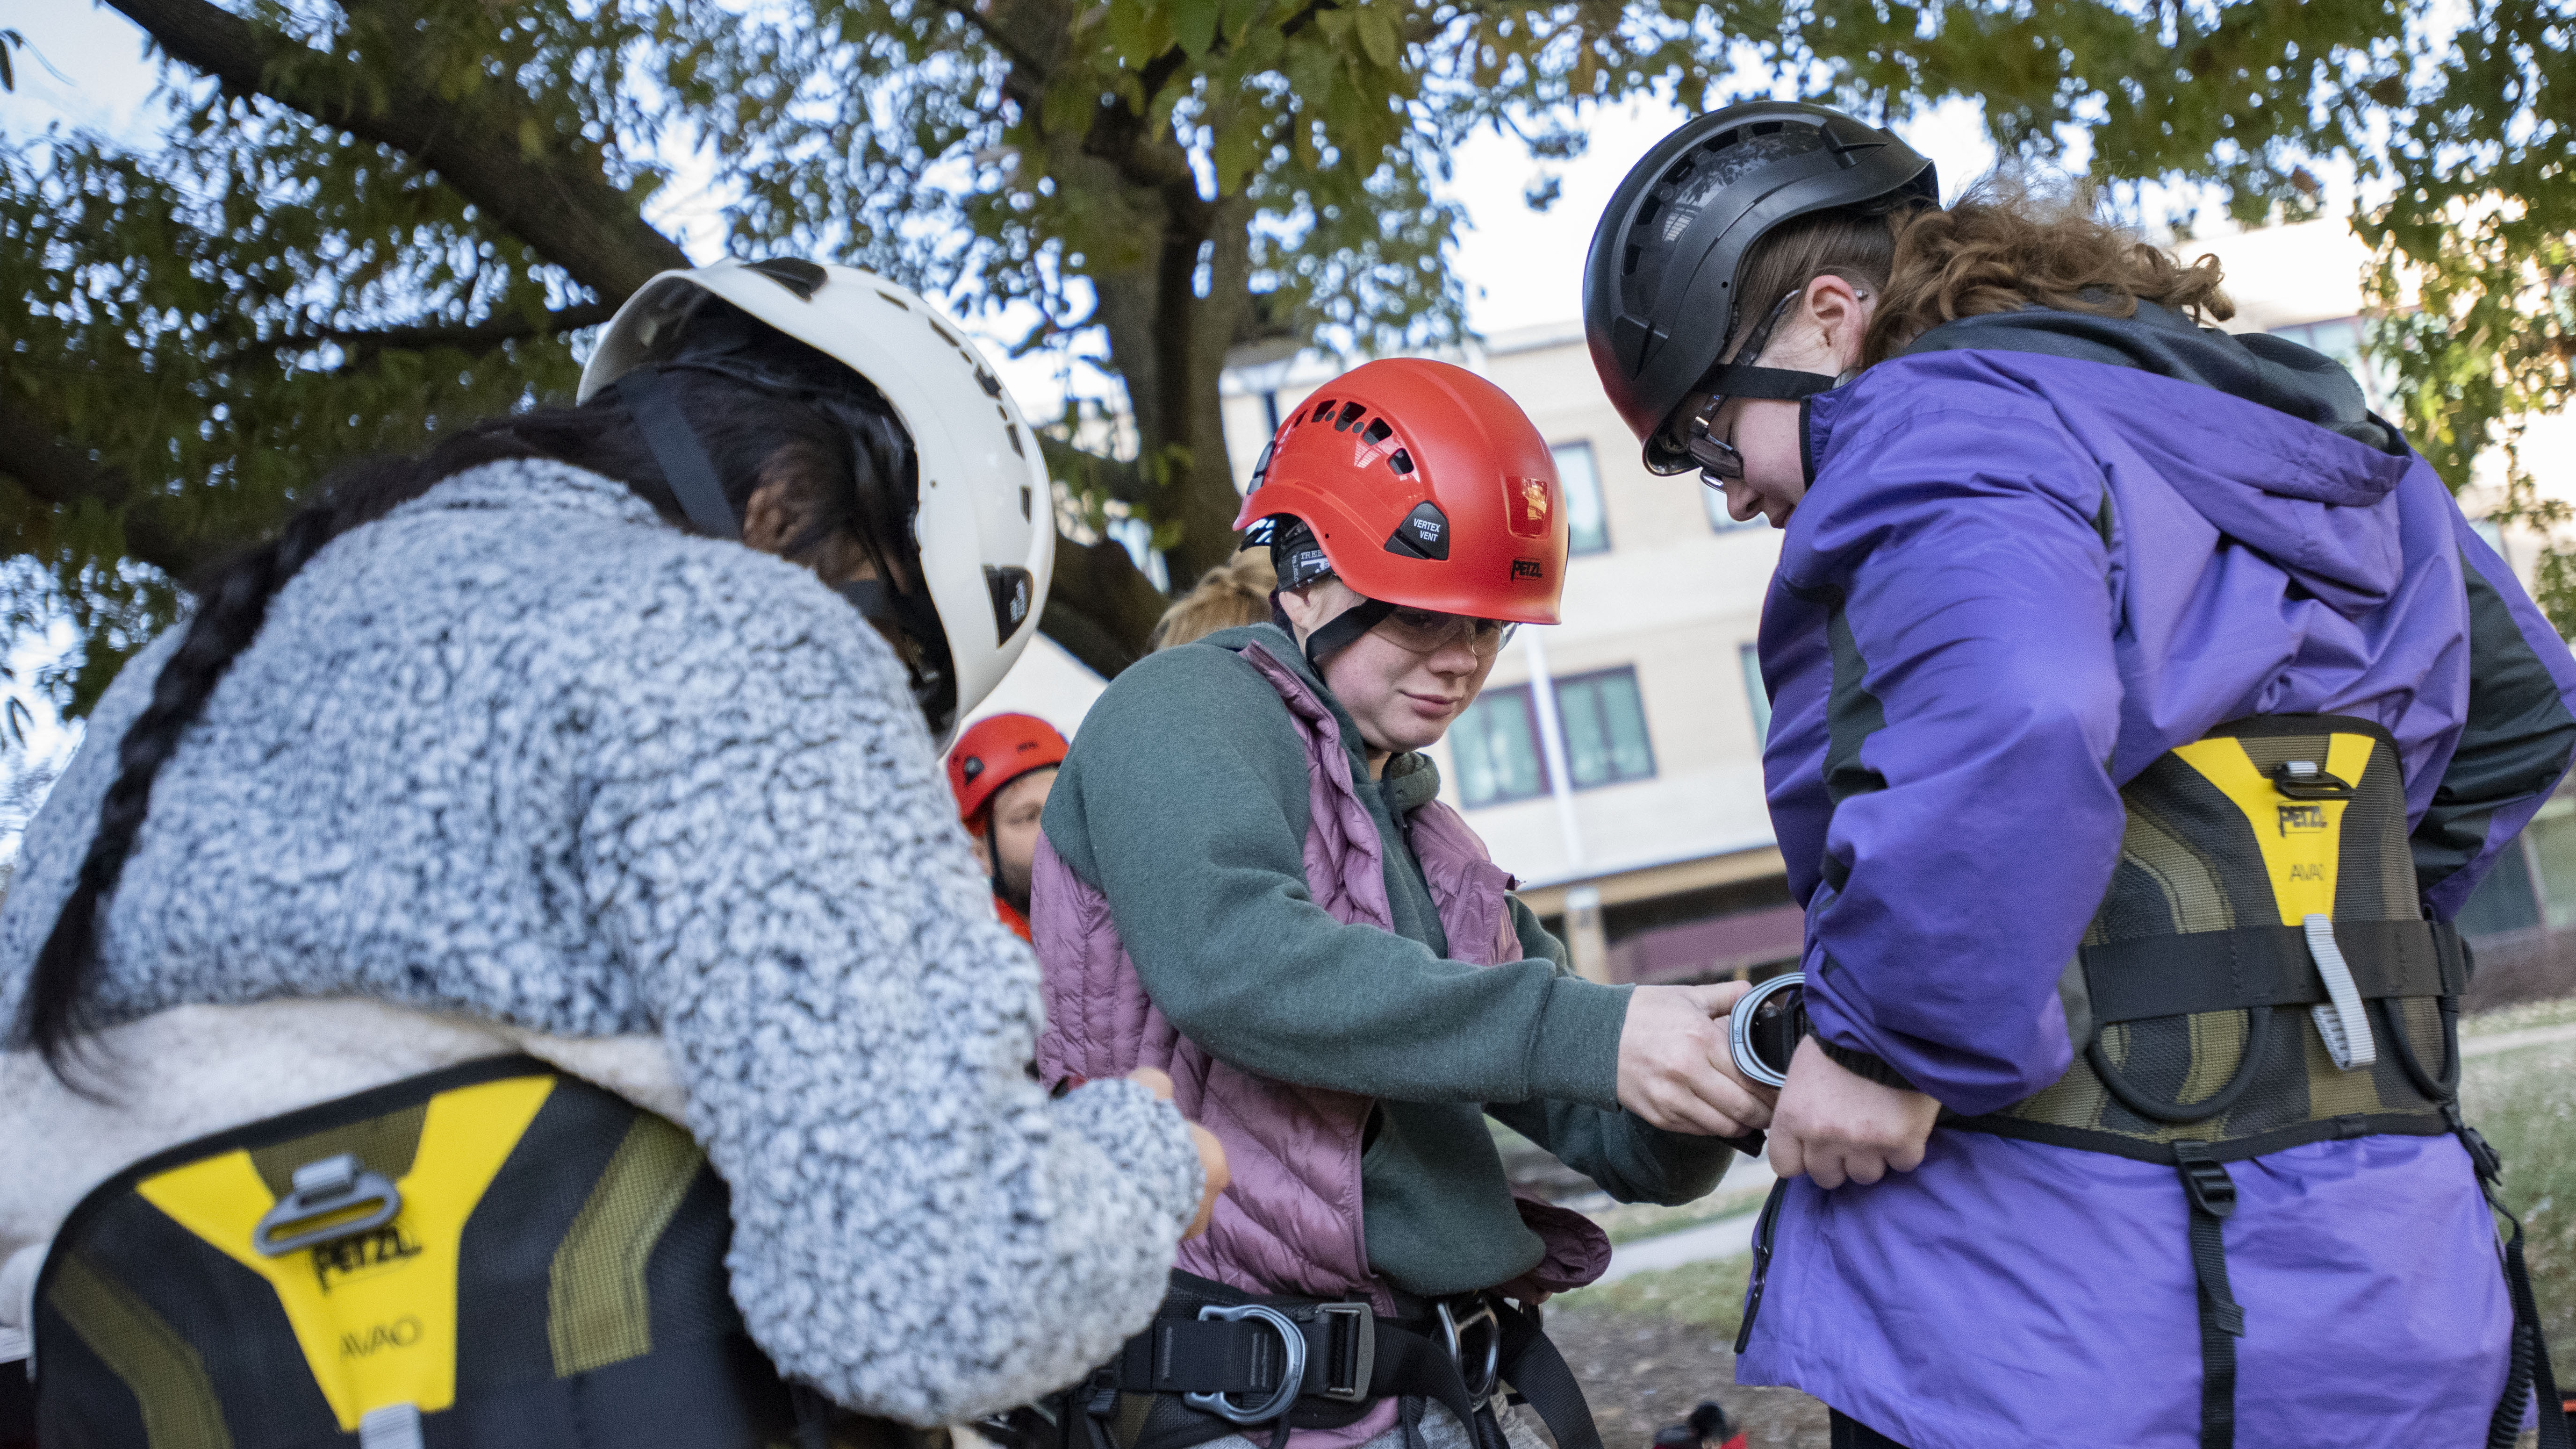 Alaina Kapla, UNL Forestry Club president, helps high school students get on their tree climbing gear during a summer climbing session at Hardin Hall. | Shawna Richter-Ryerson